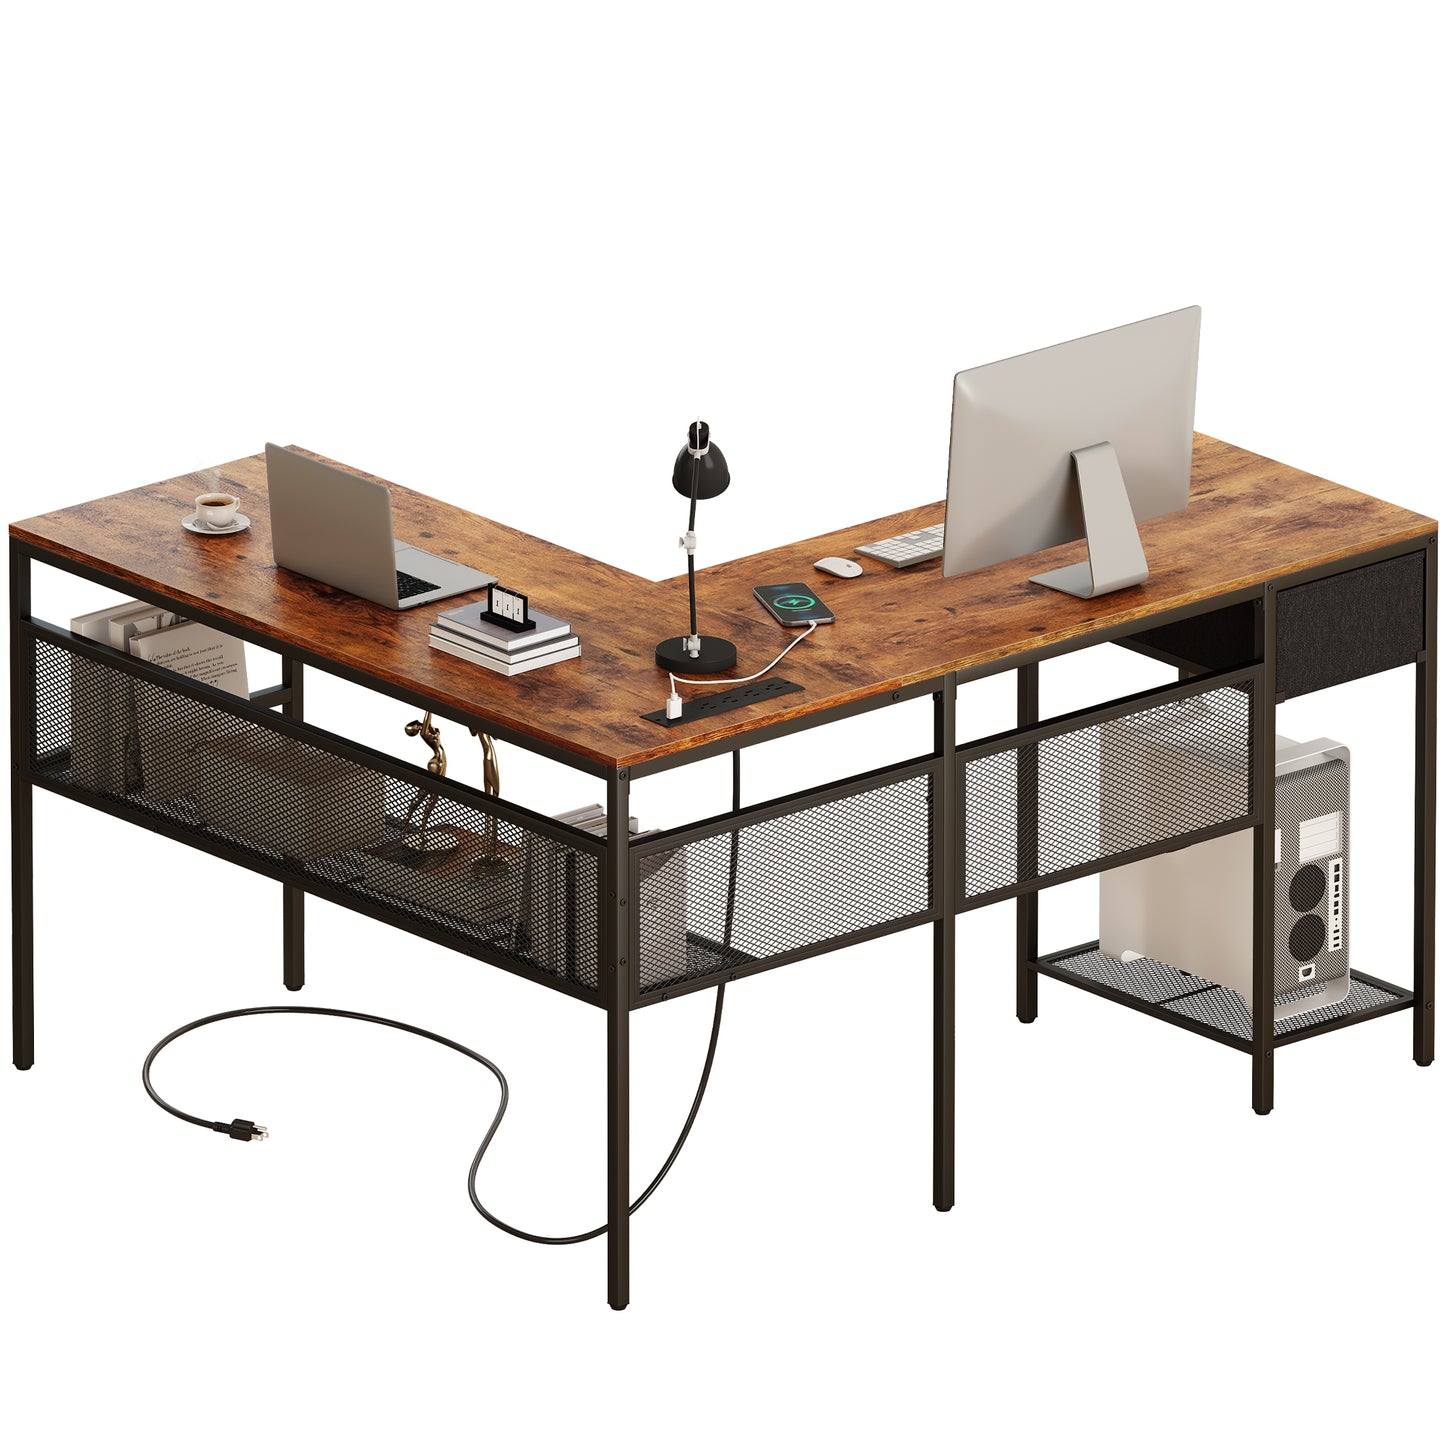 SUPERJARE L Shaped Desk with Power Outlets, Computer Desk with Drawer, Reversible Corner Desk with Grid Storage Bookshelf, Rustic Brown 7937ZC